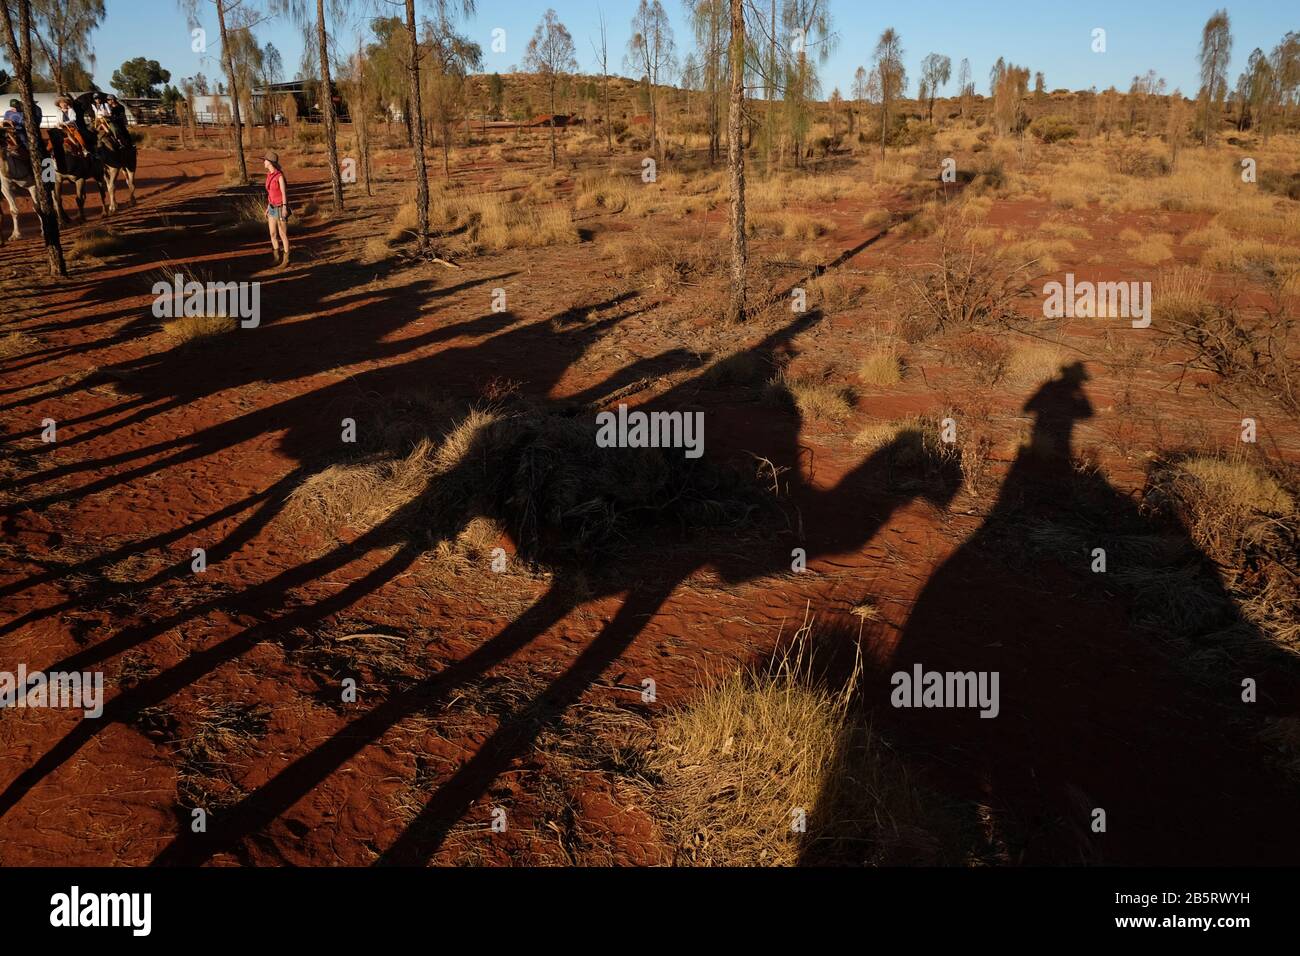 A line of long camel shadows against red sand, desert oaks and native grasses, a camel ride in the Northern Territory; Australia Stock Photo